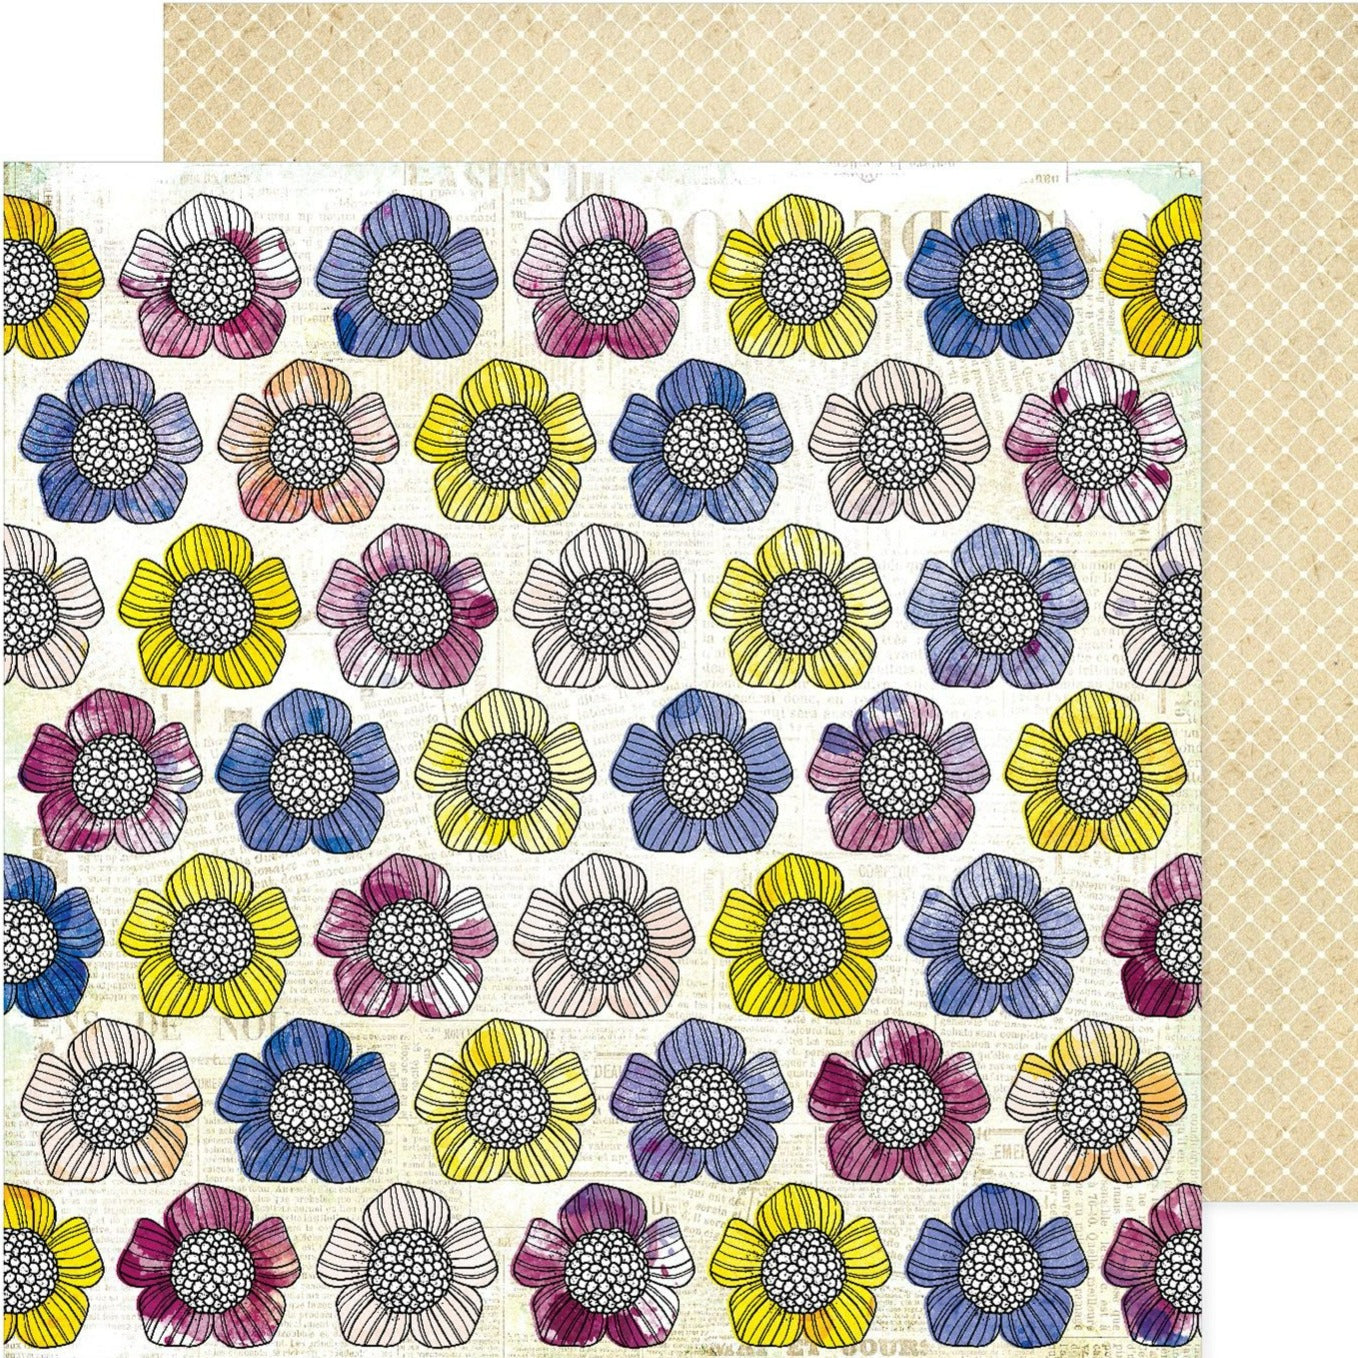 FRESHLY PICKED - 12x12 Double-Sided Patterned Paper - Vicki Boutin